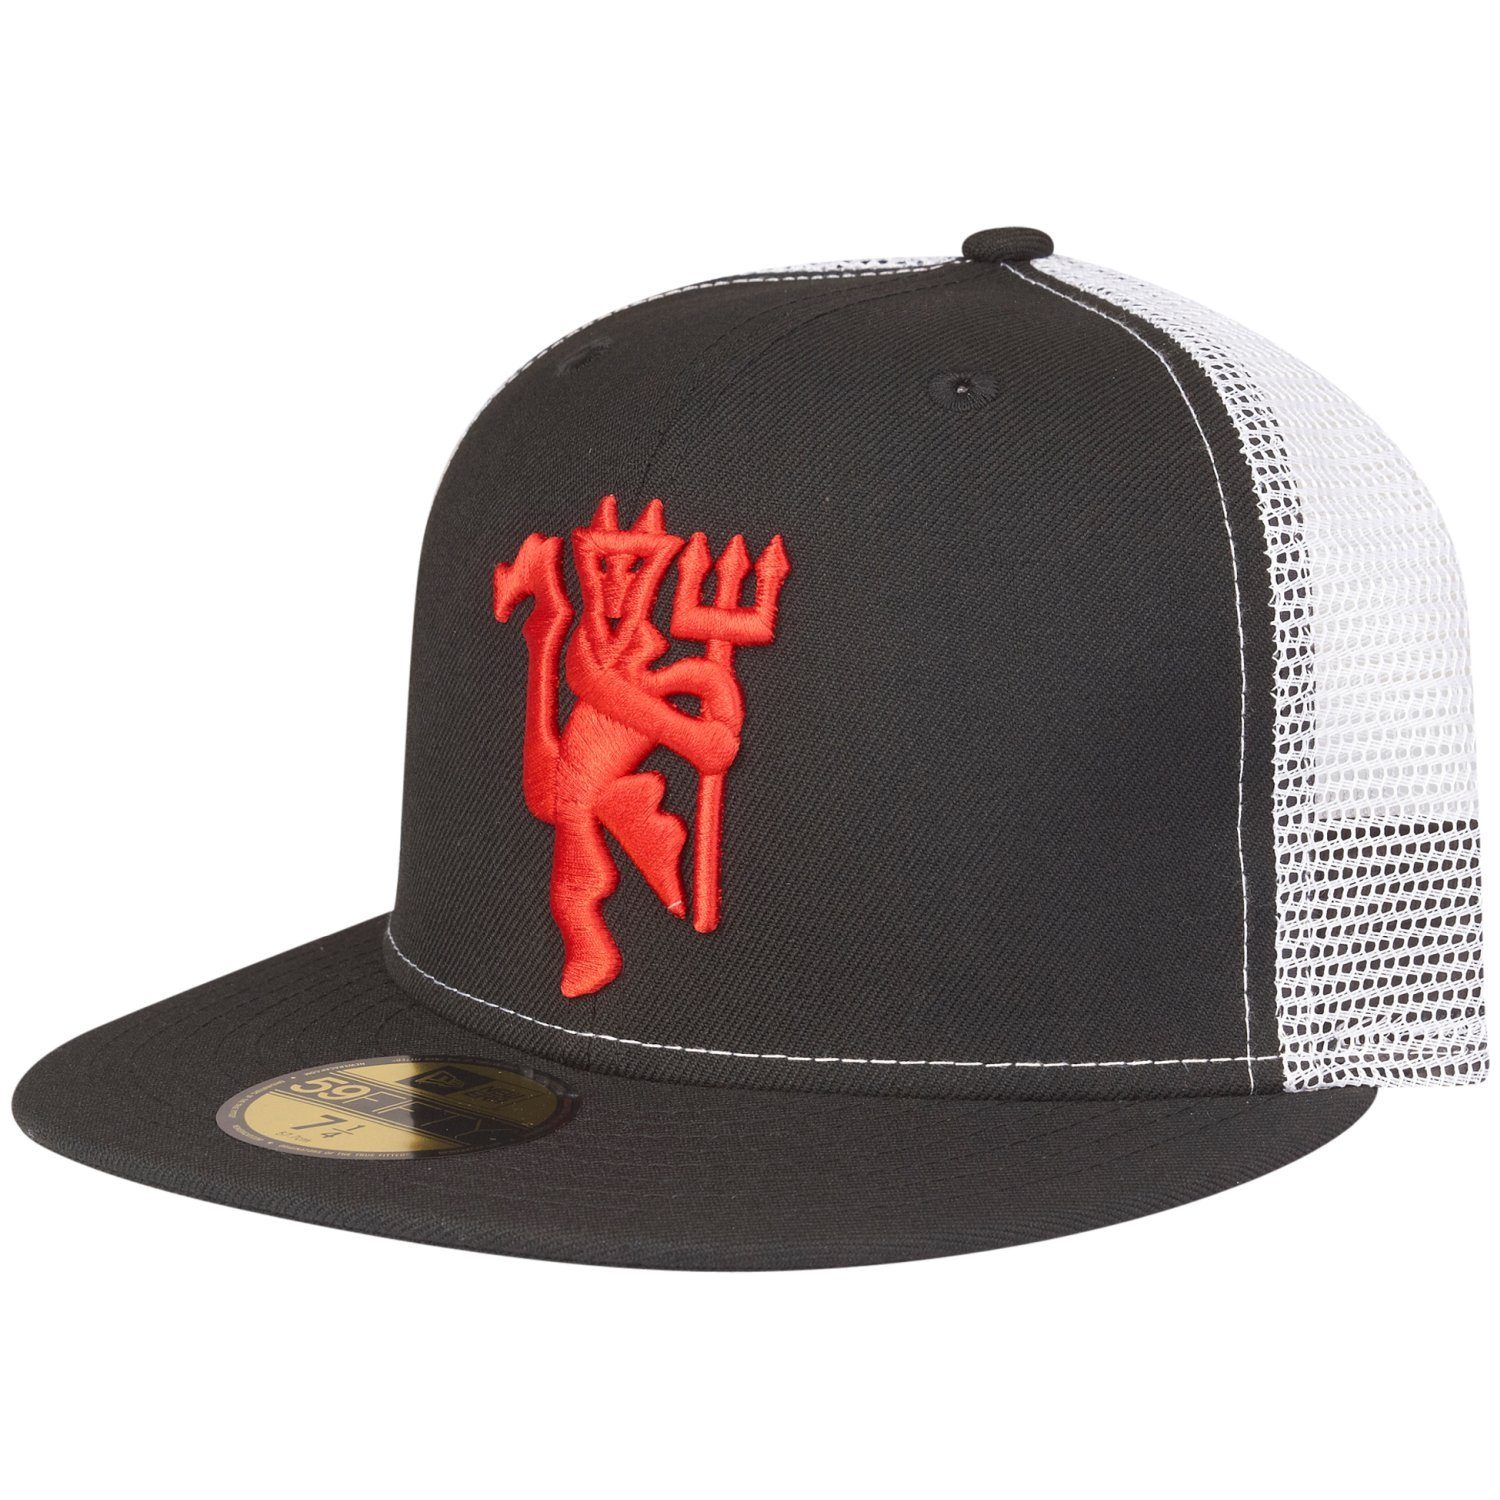 New Era Fitted Cap United 59Fifty DEVIL Manchester